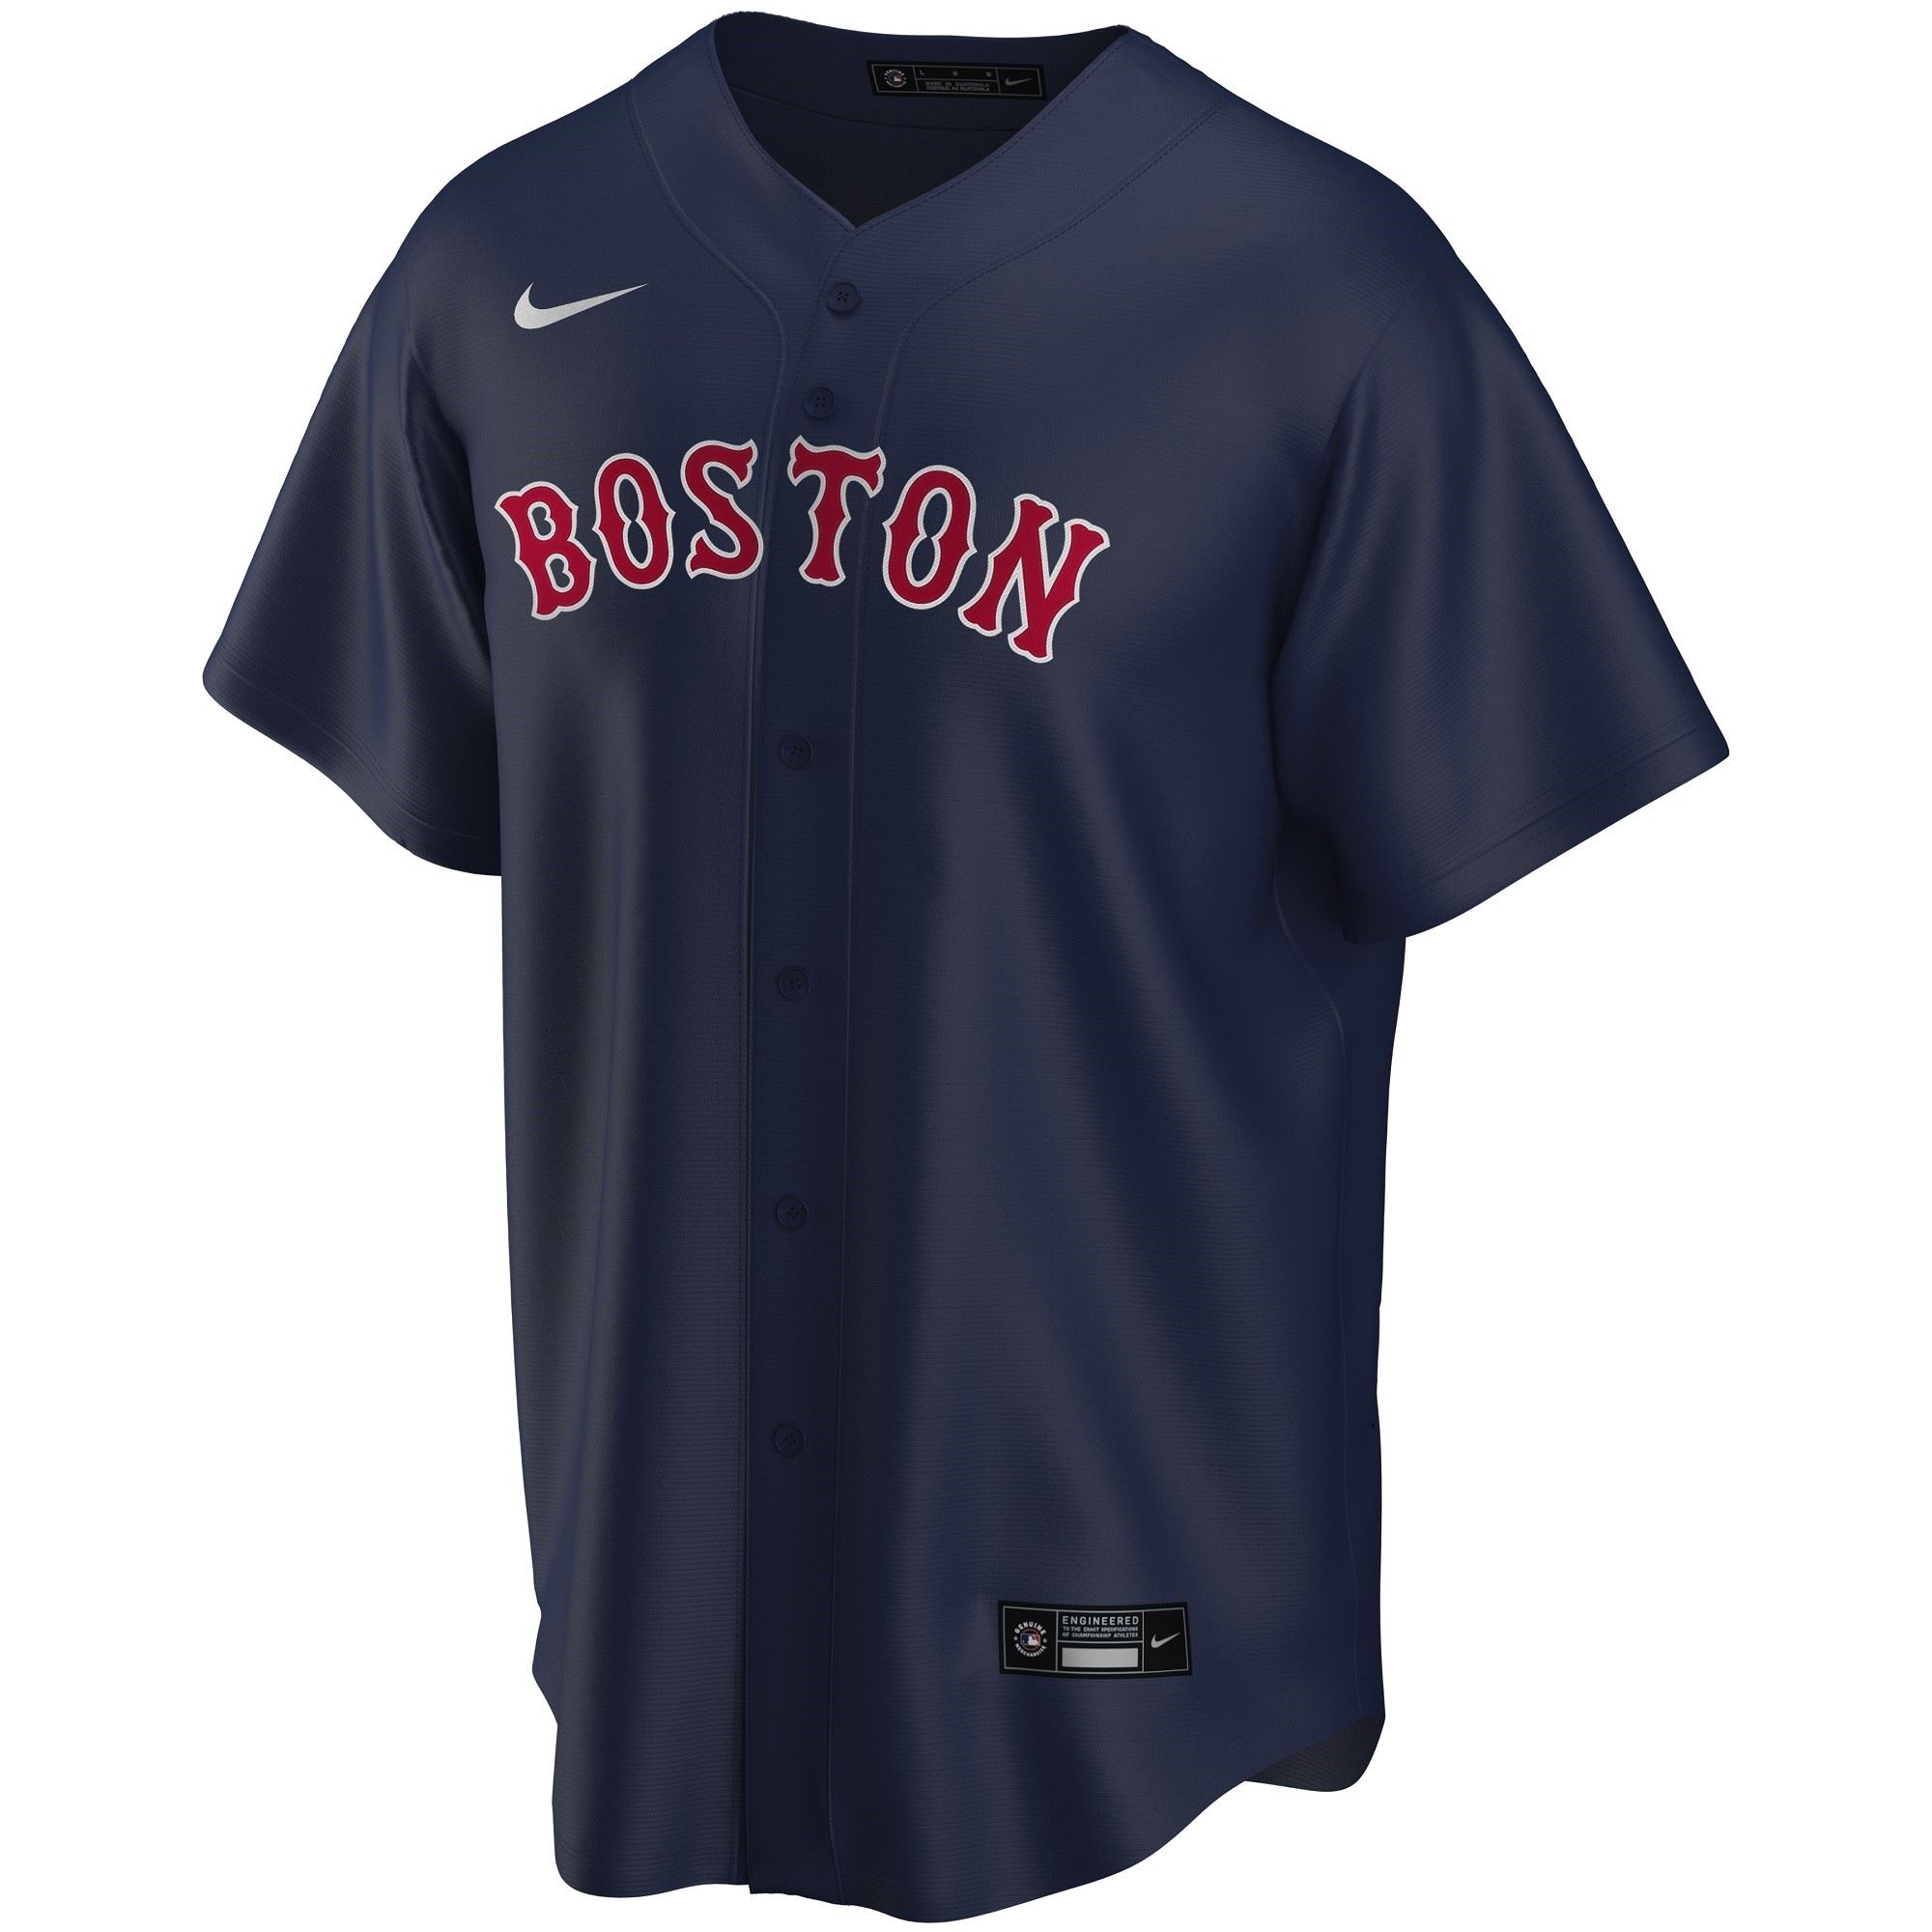 Boston Red Sox Official MLB Replica Alternate Jersey Navy Nike